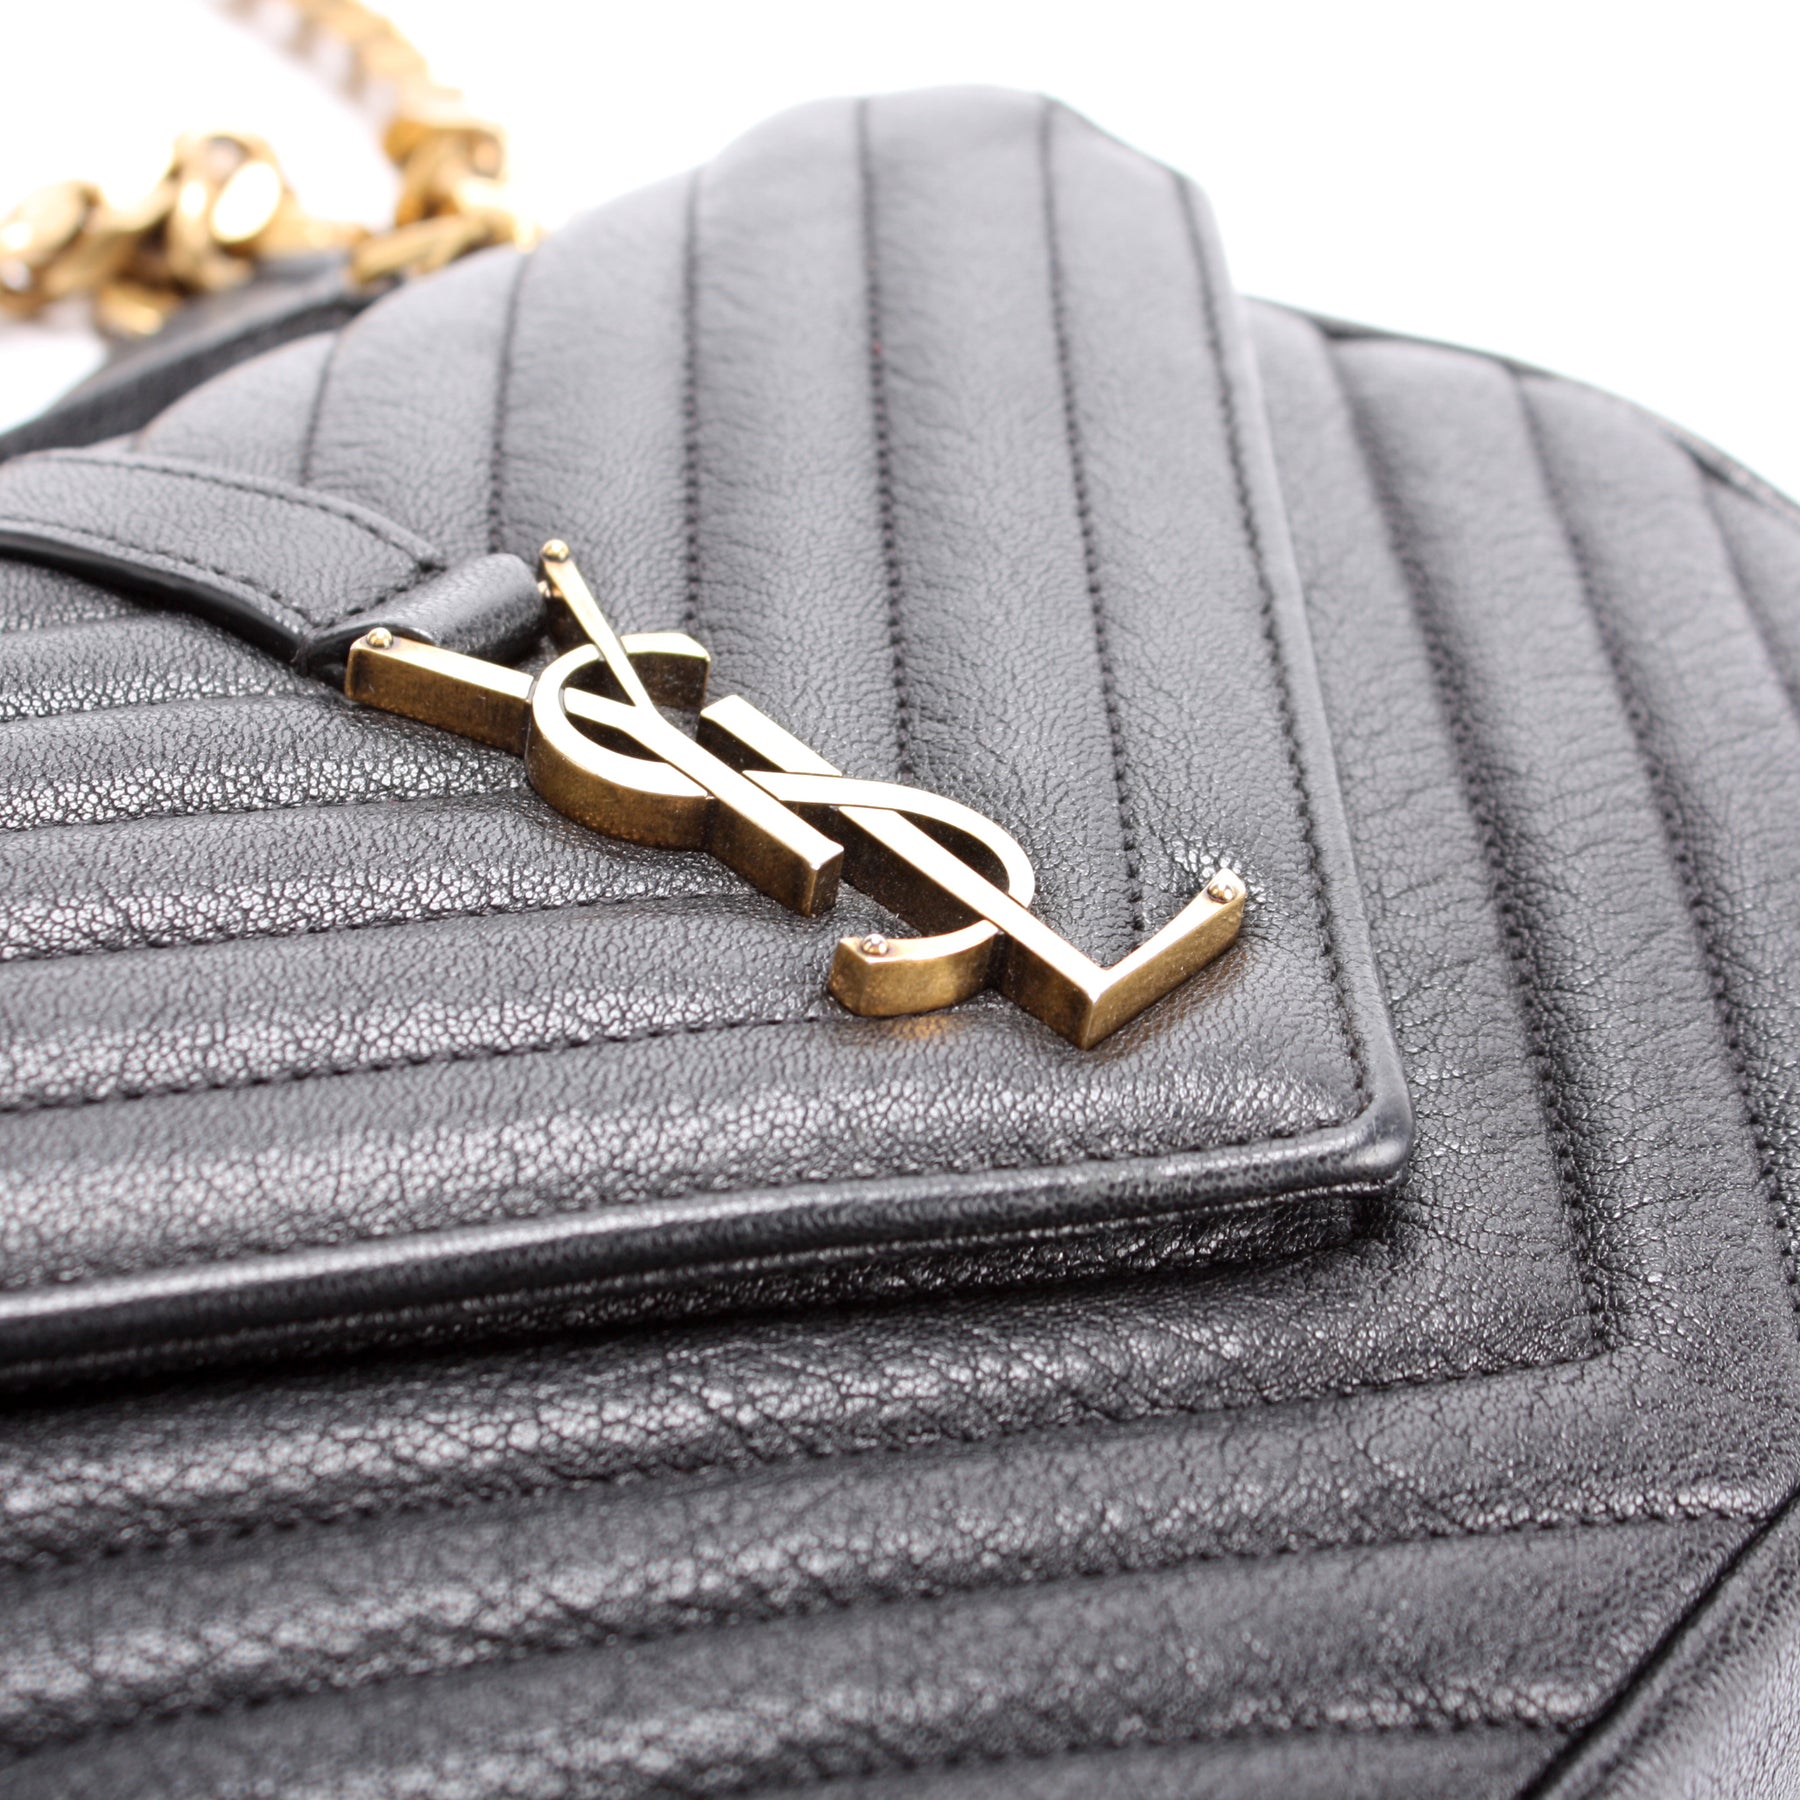 Luxury Bags by Maison Kingsley Couture – Maison Kingsley Couture Spain